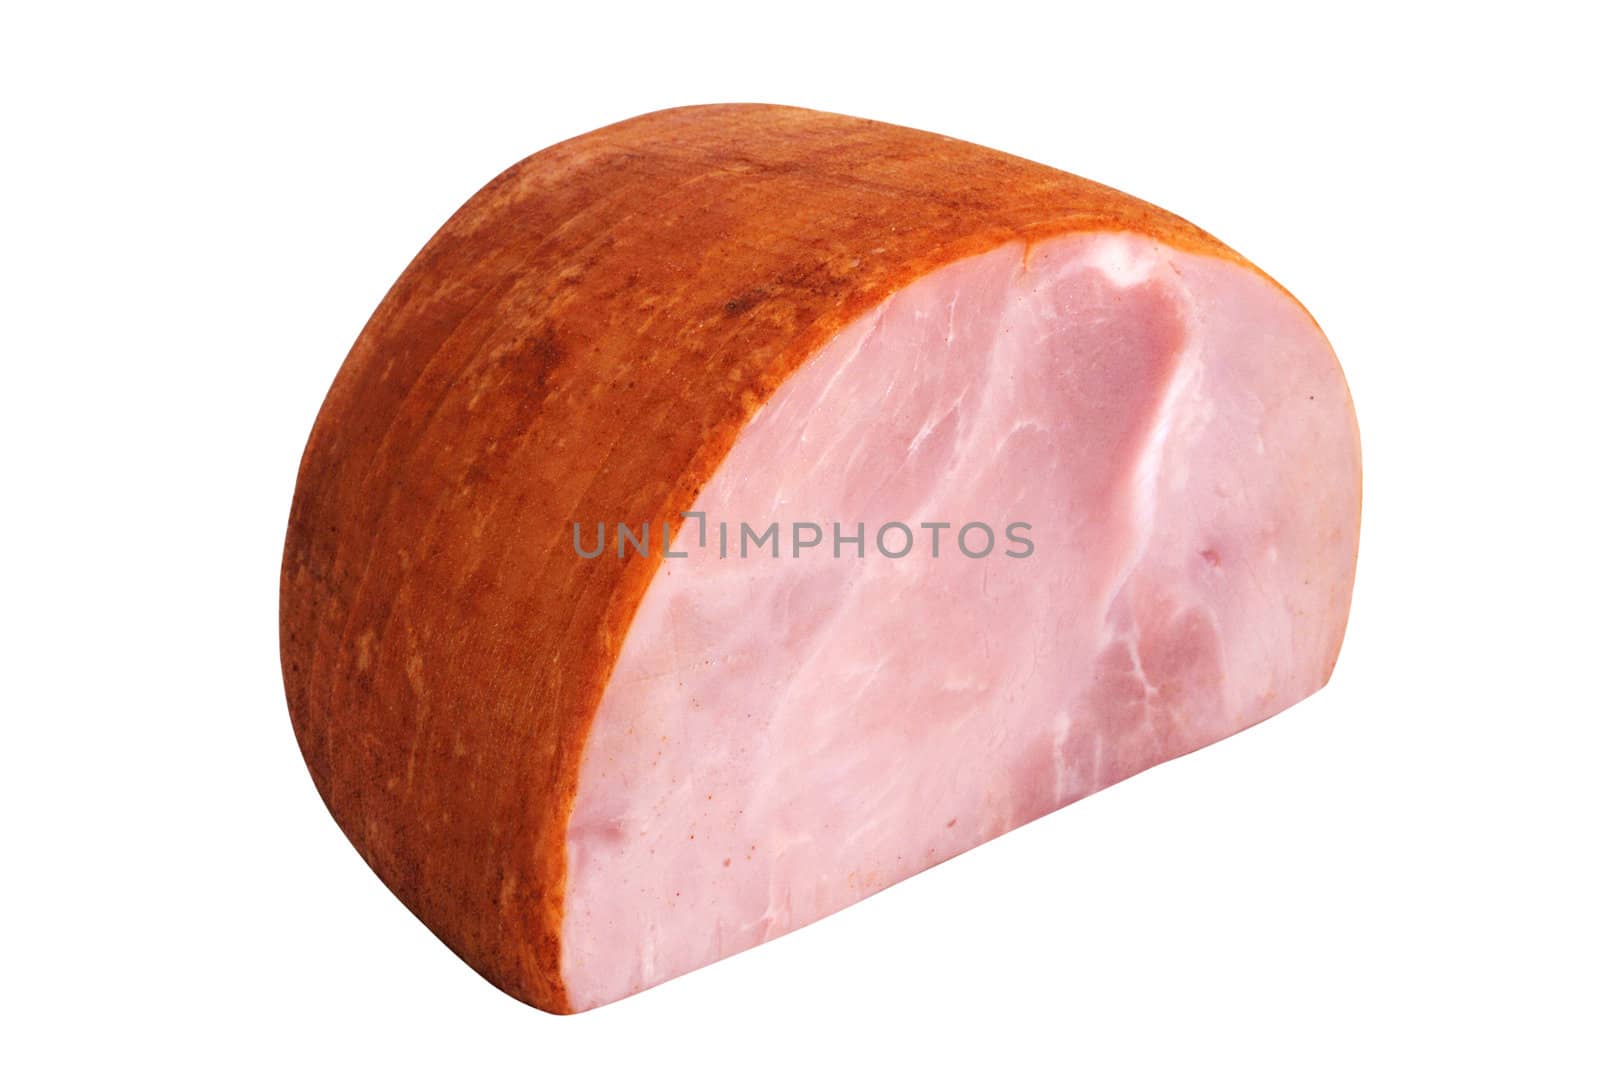 Cross section of ham isolated on white background with clipping path.